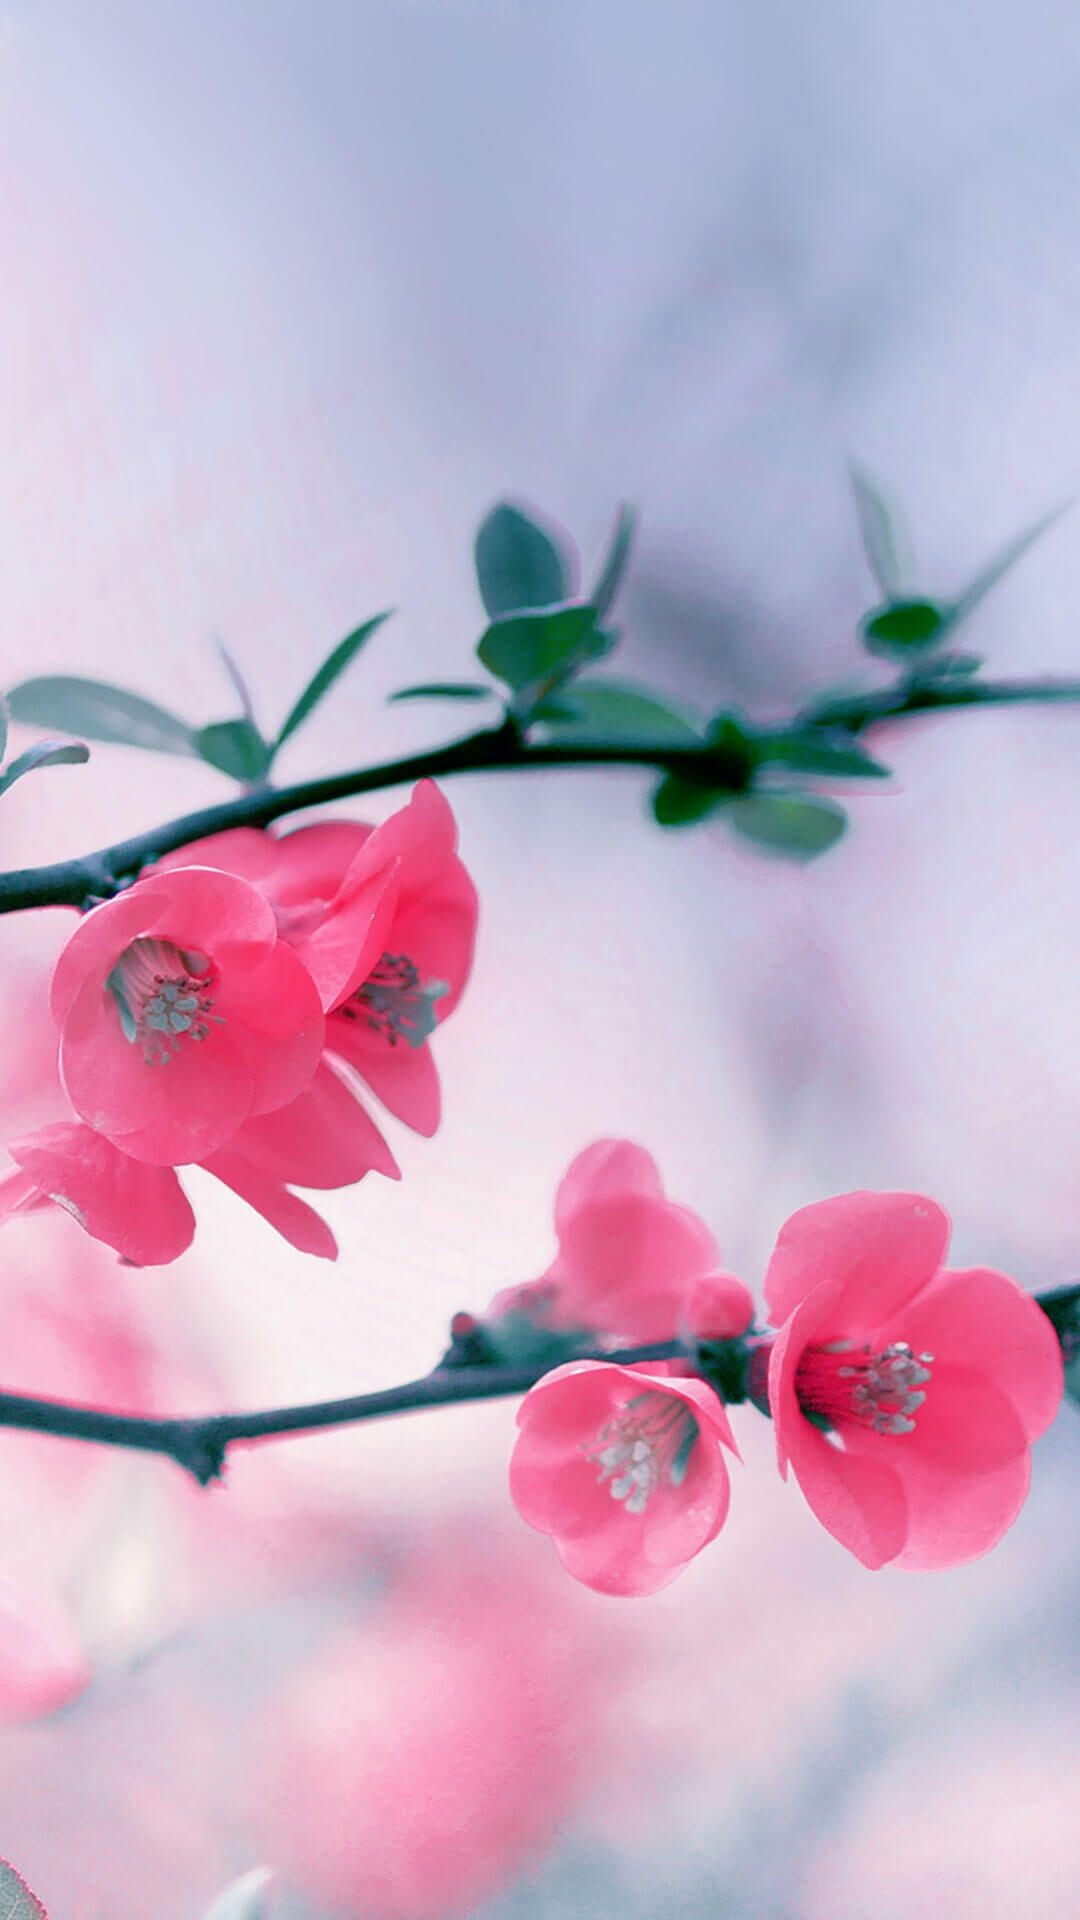 Spring: The time that is associated with ideas of rebirth, renewal, resurrection, and regrowth. 1080x1920 Full HD Wallpaper.